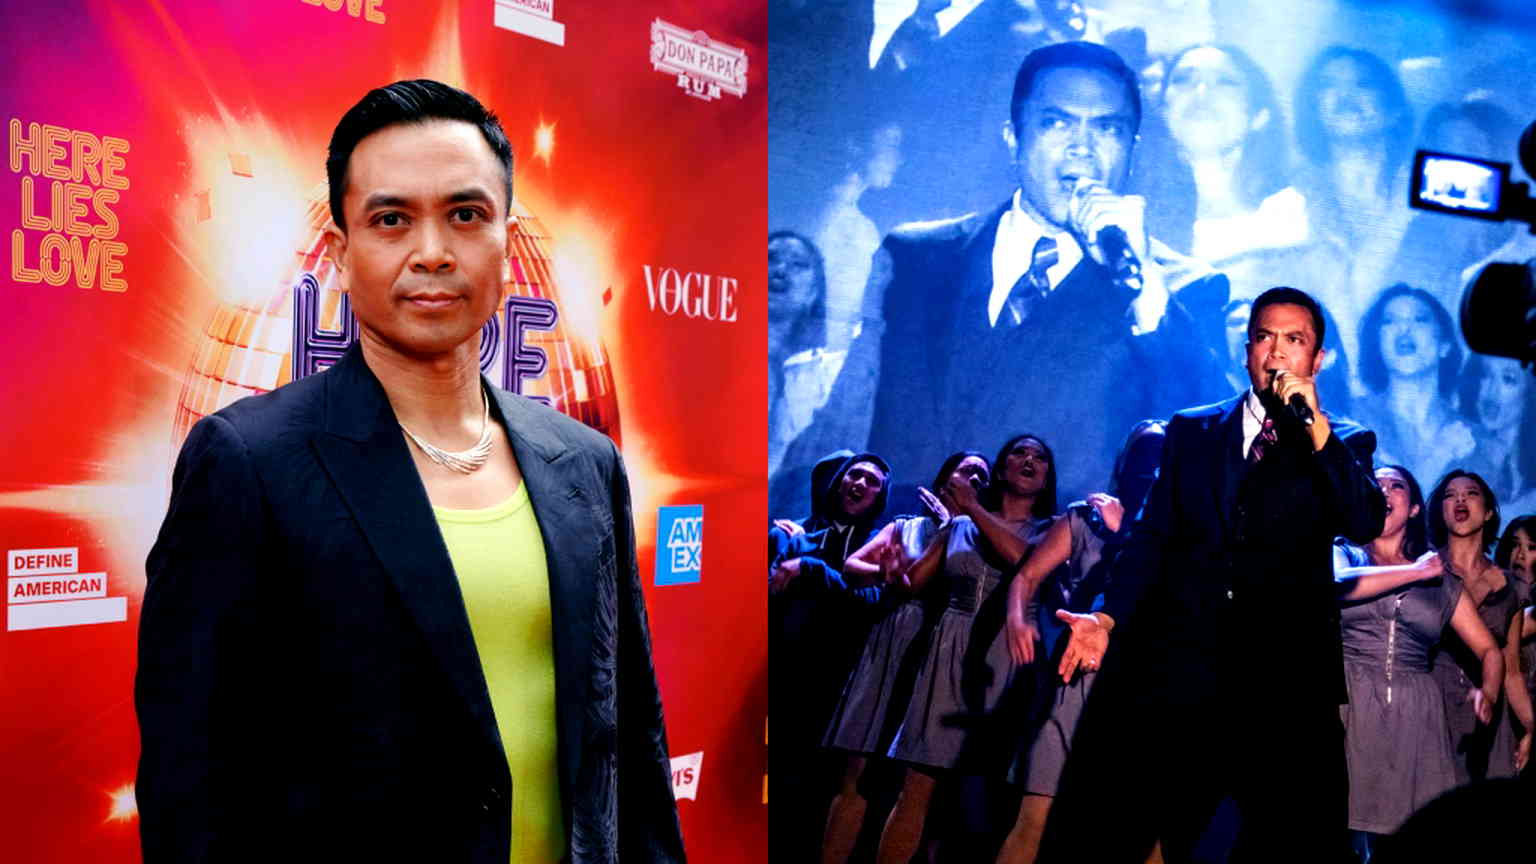 ‘Here Lies Love’ actor Jose Llana on why the dark history of Philippines’ martial law must be shared